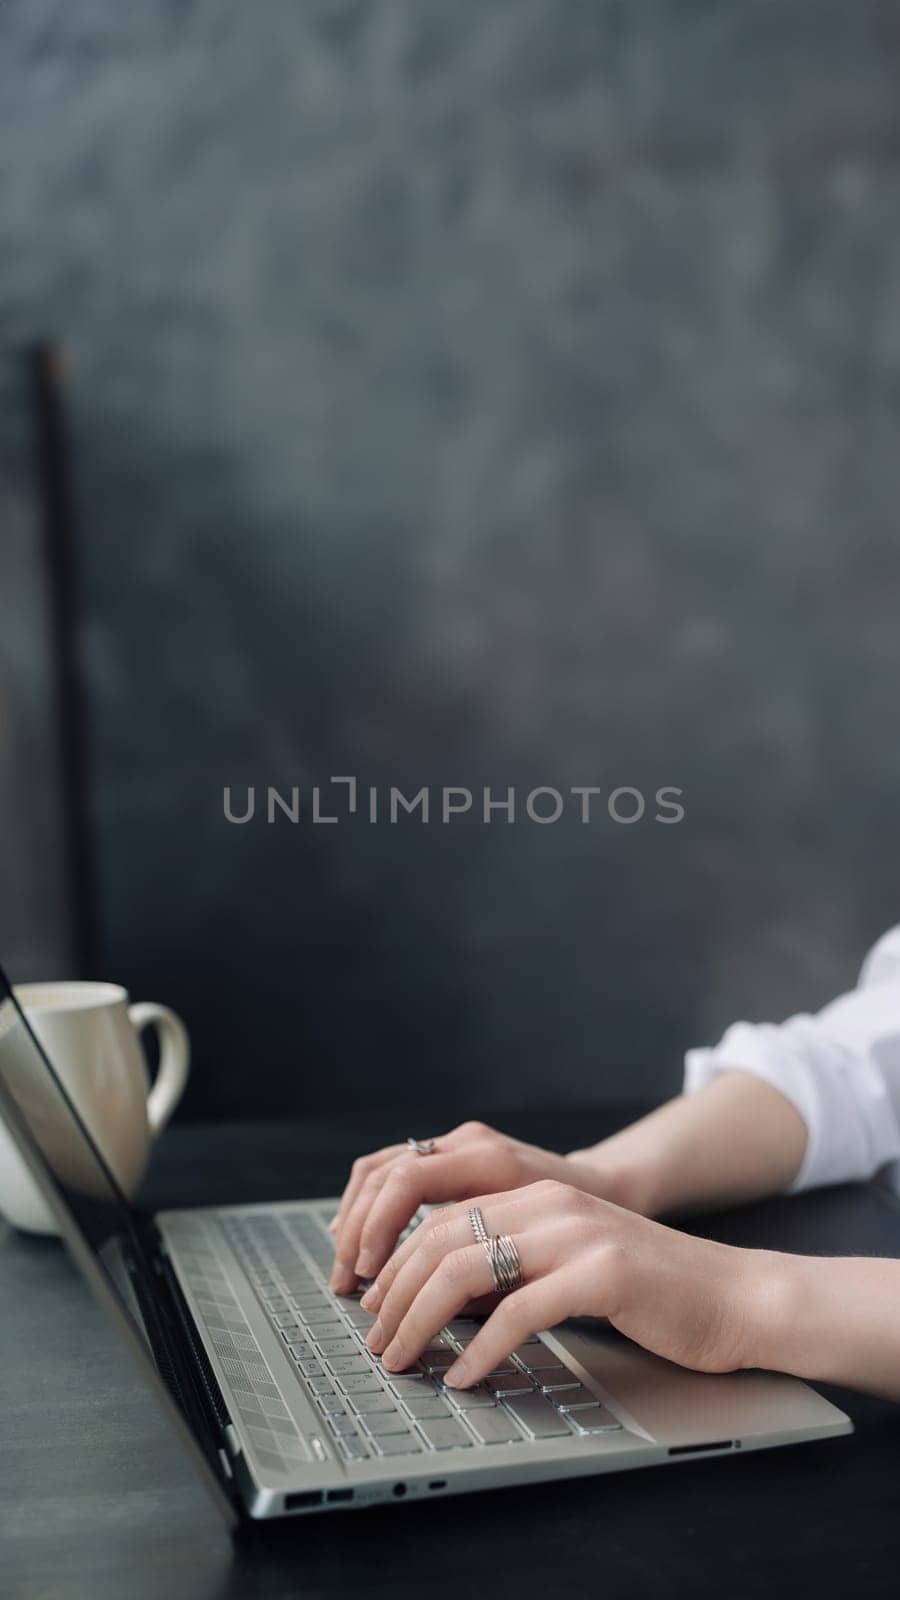 Versatile Woman Balancing Business and Learning. Working from Home, Freelancing, Online Marketing, and Office Workspace. Business woman using laptop at home, woman typing on computer keyboard close-up